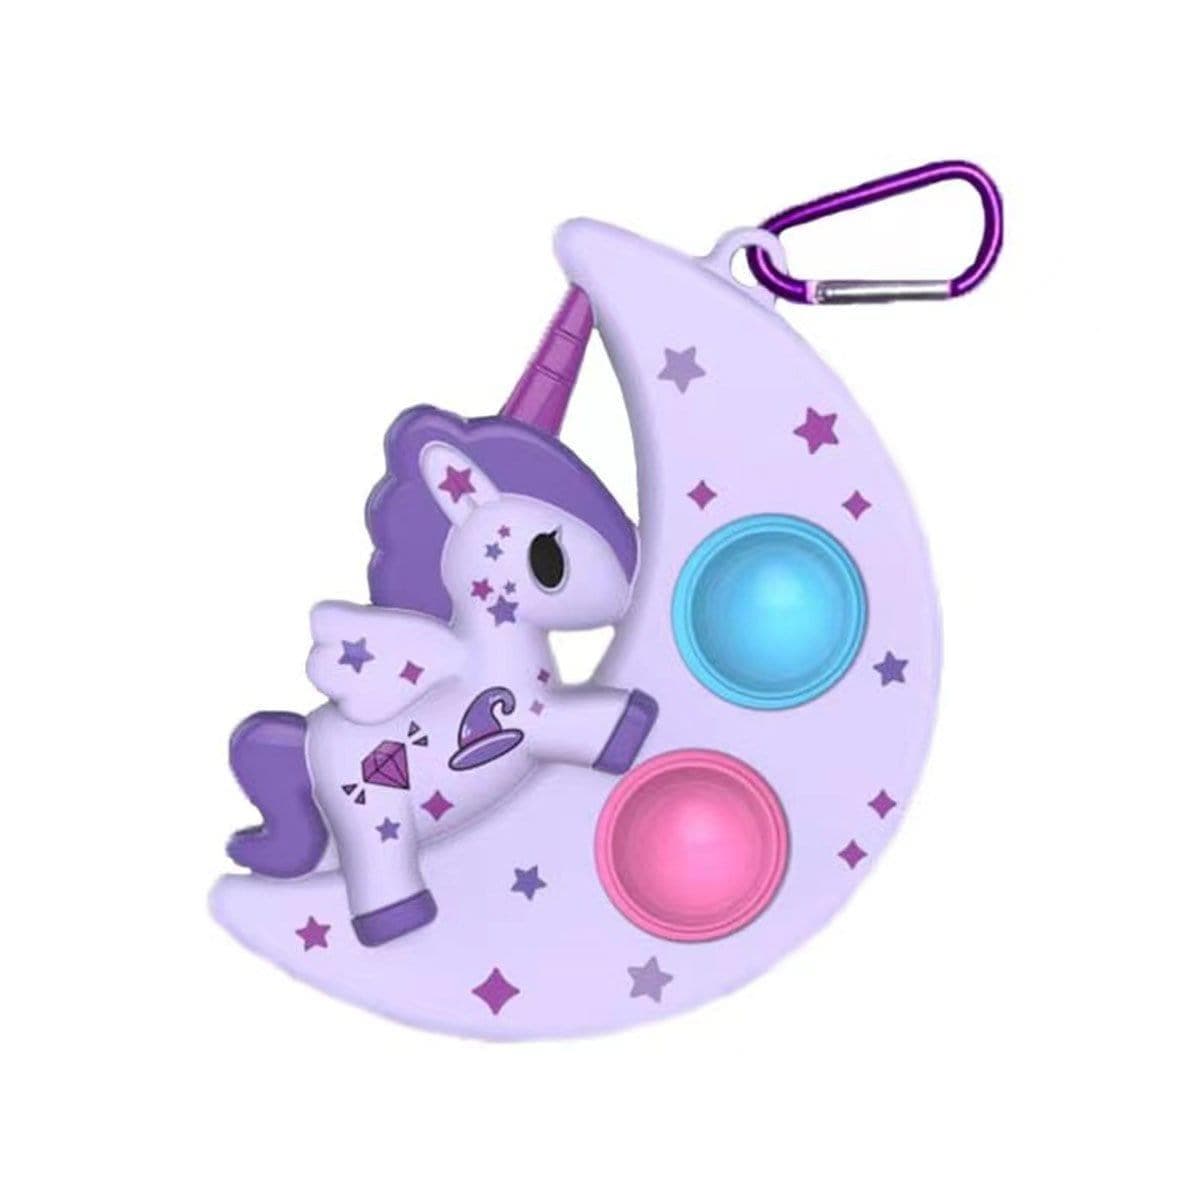 Buy Novelties Pop Keychain, Purple Moon sold at Party Expert